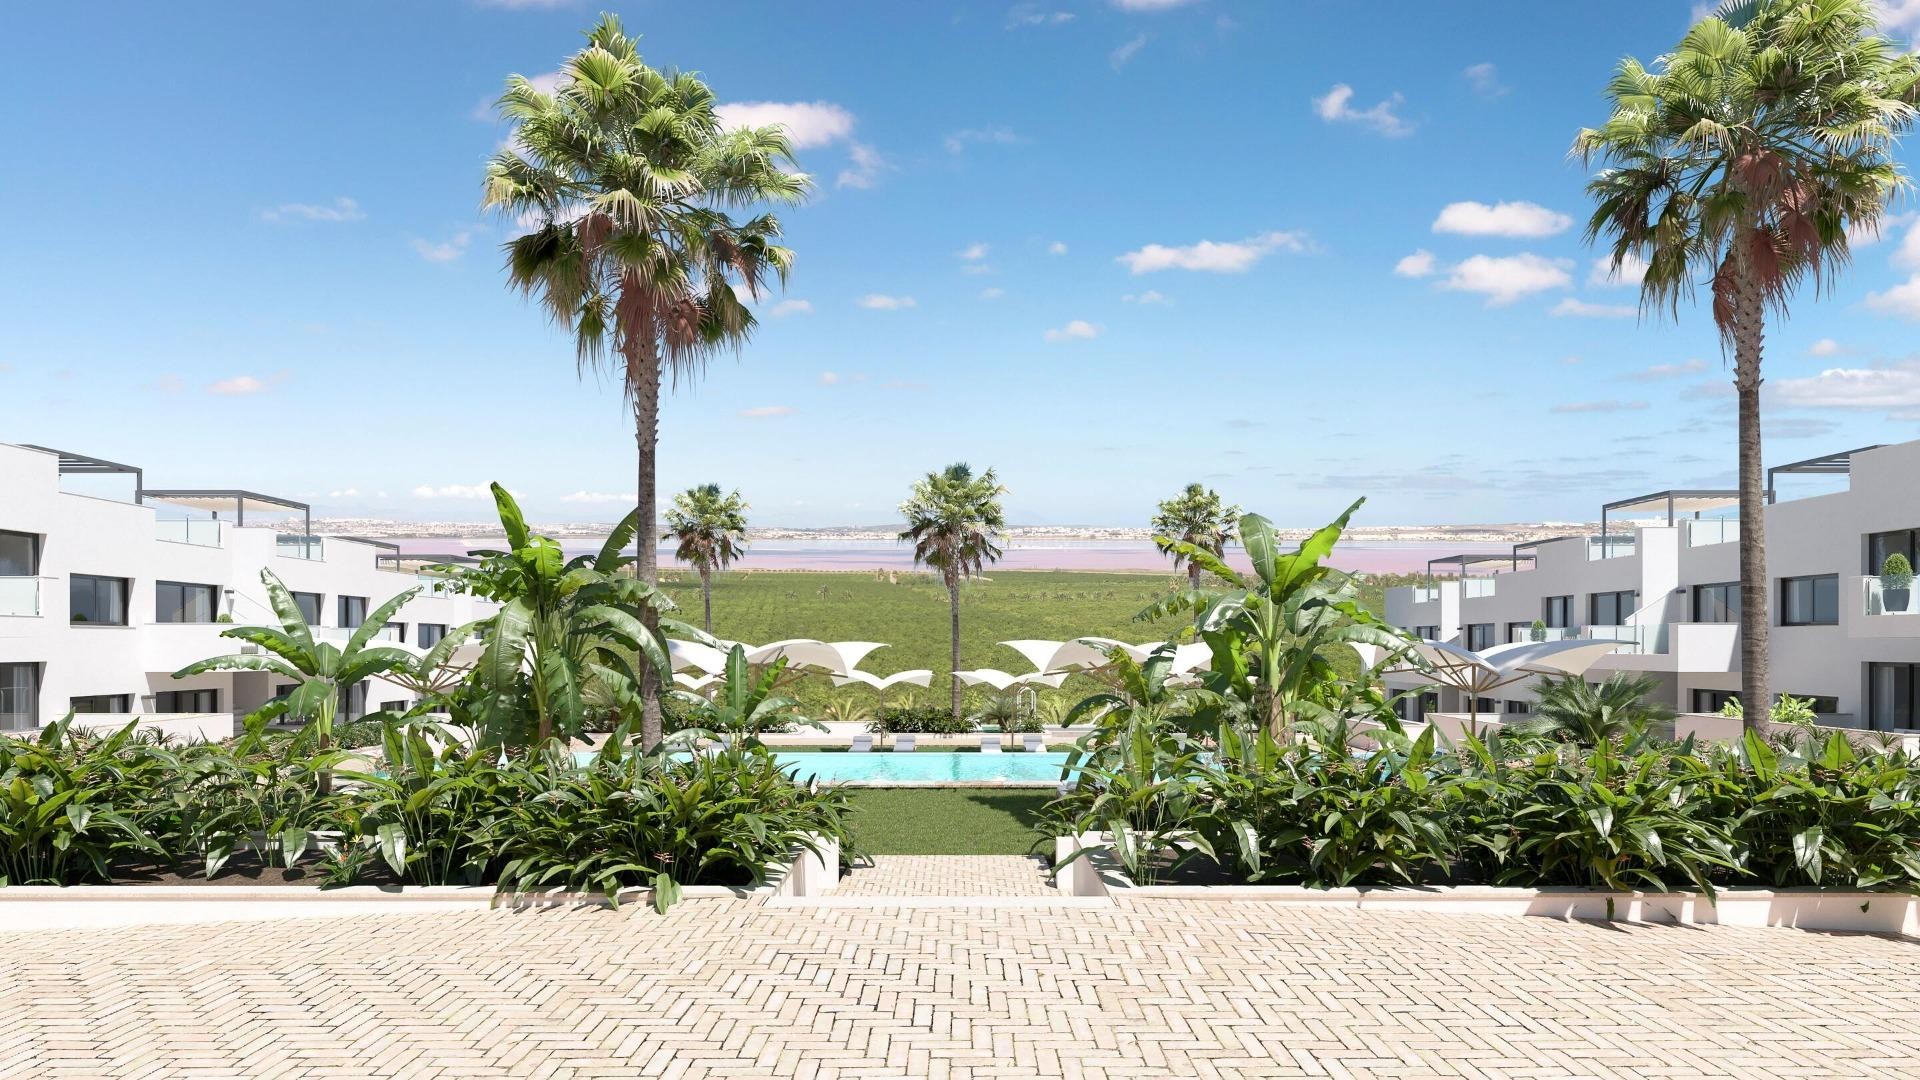 Brand new bungalow apartments in Los Balcones, Torrevieja, 2/3 bedrooms, 2 bathrooms, great pool area with garden, spectacular views over pink lagoon